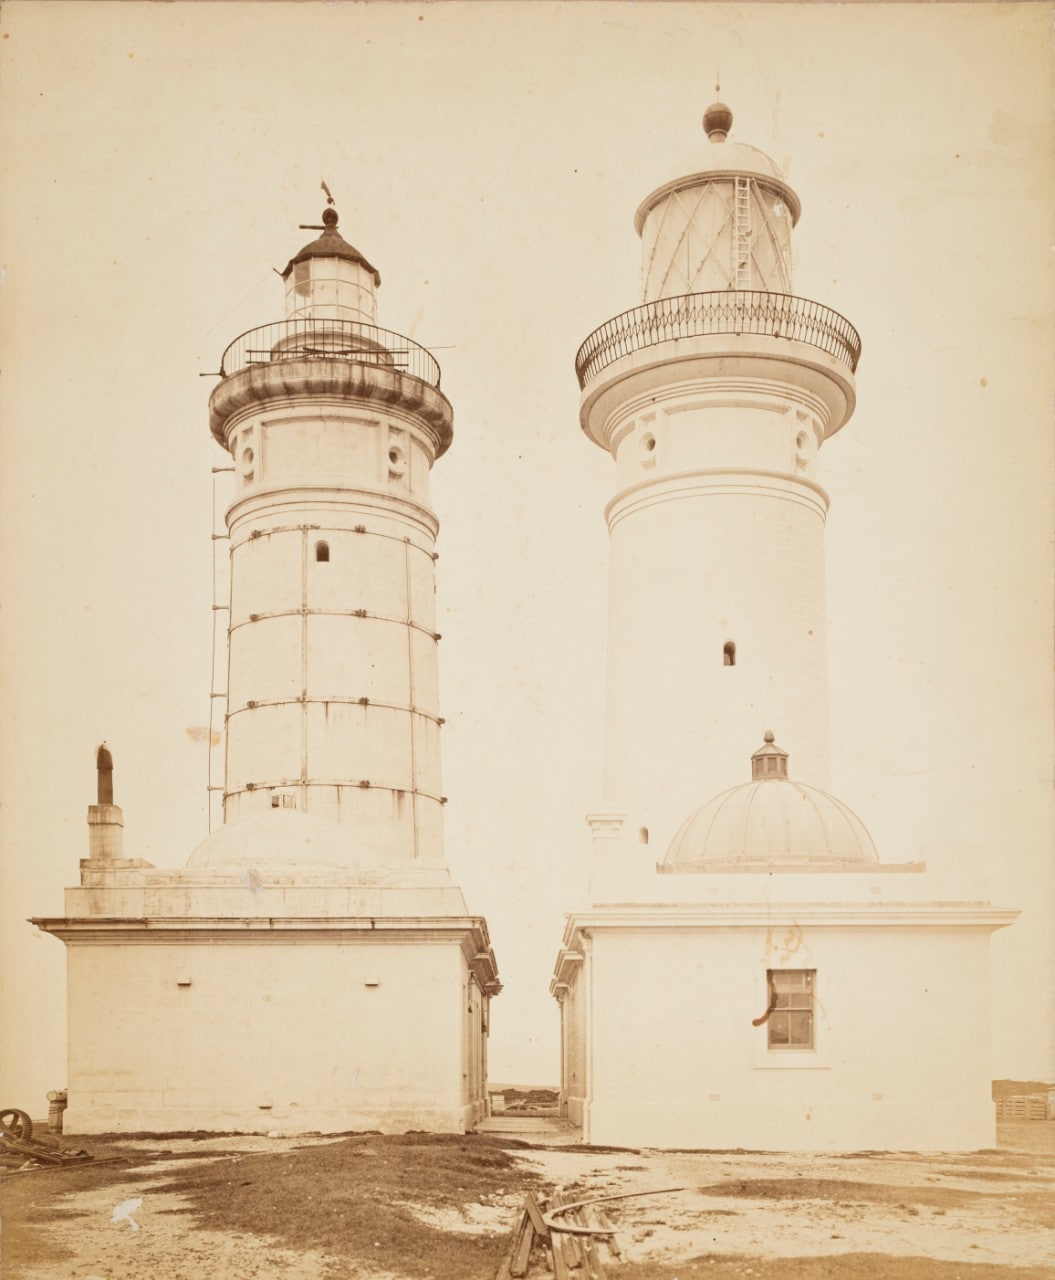 The two Macquarie lighthouses